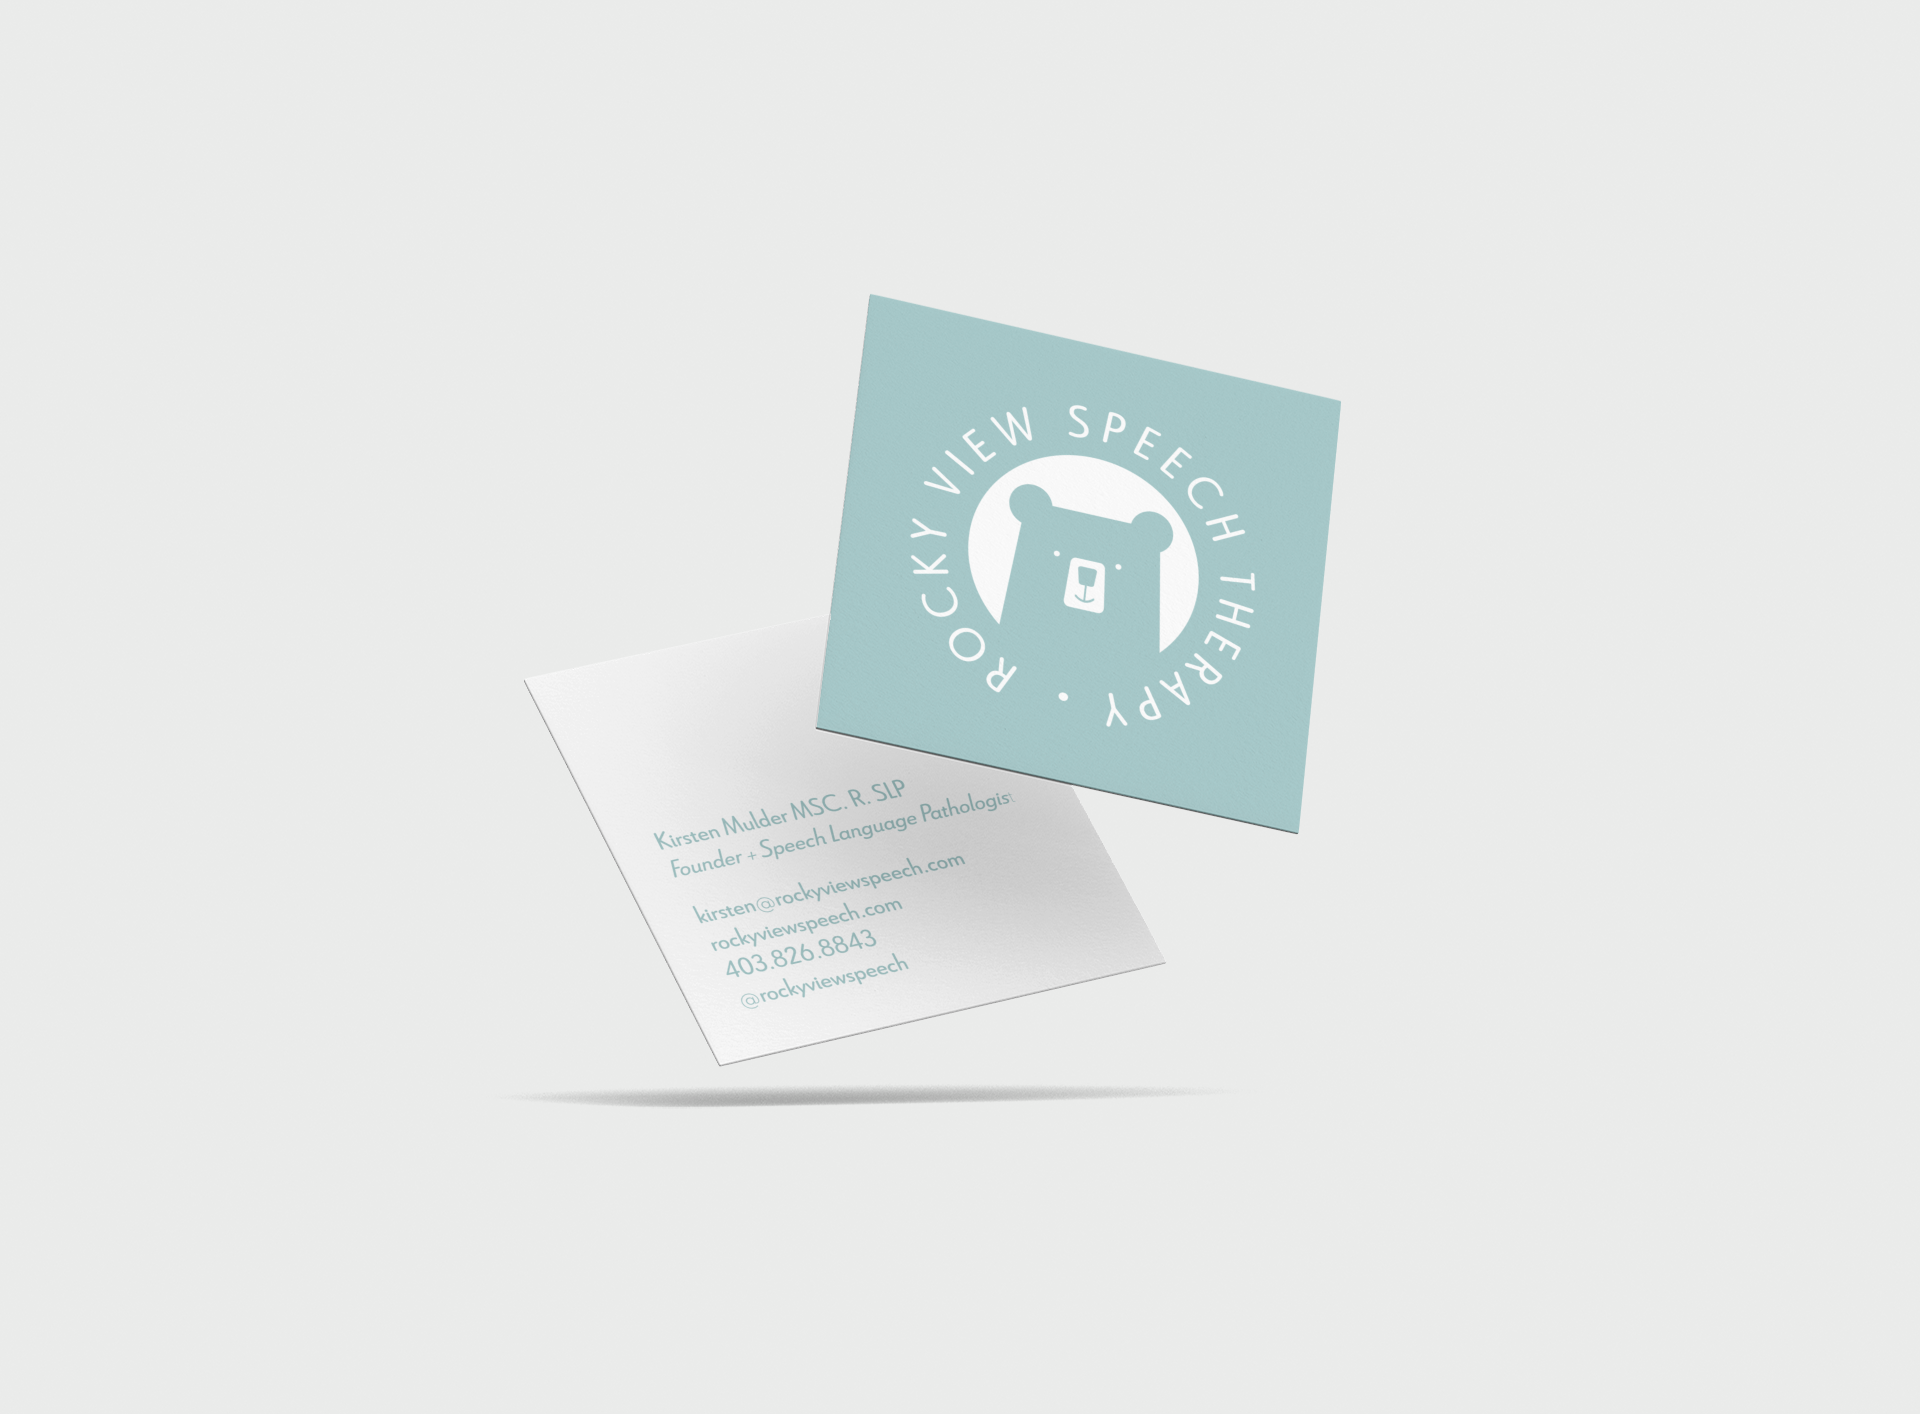 mockup-of-two-square-business-cards-floating-against-a-plain-background-287-el.png